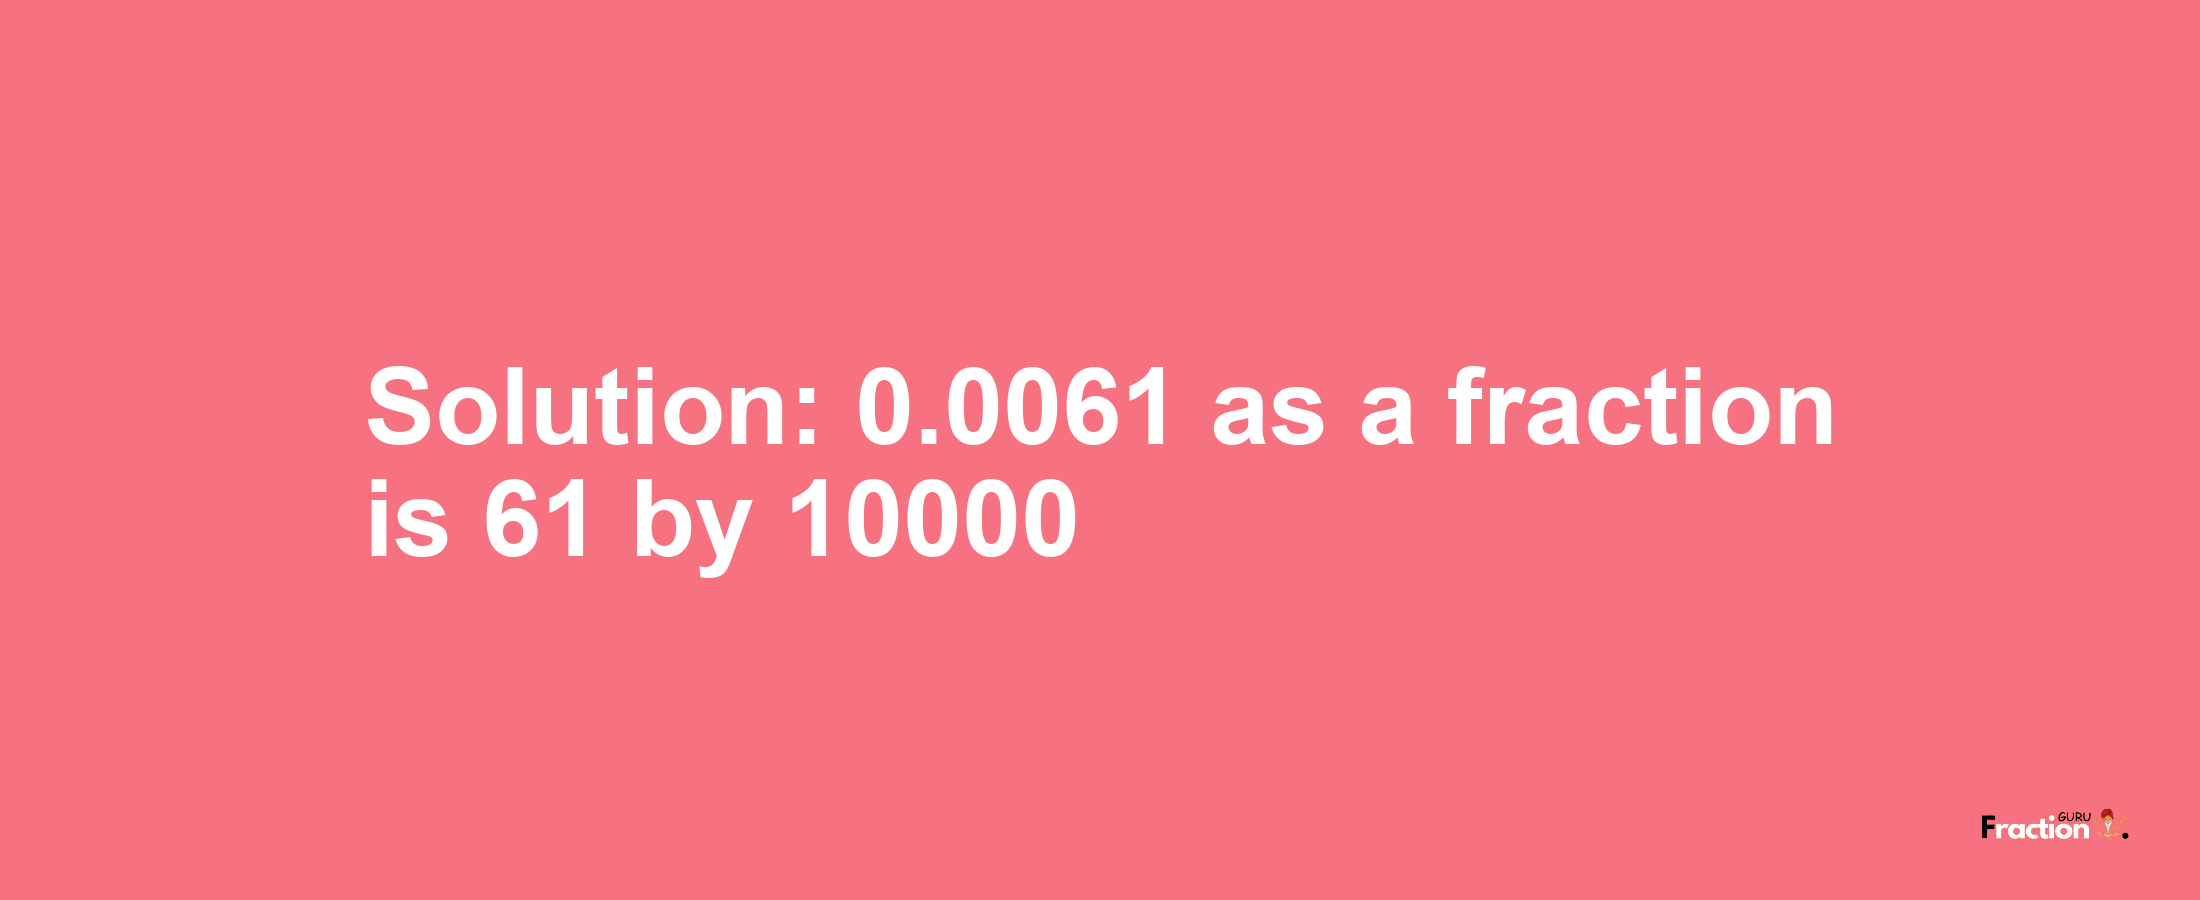 Solution:0.0061 as a fraction is 61/10000